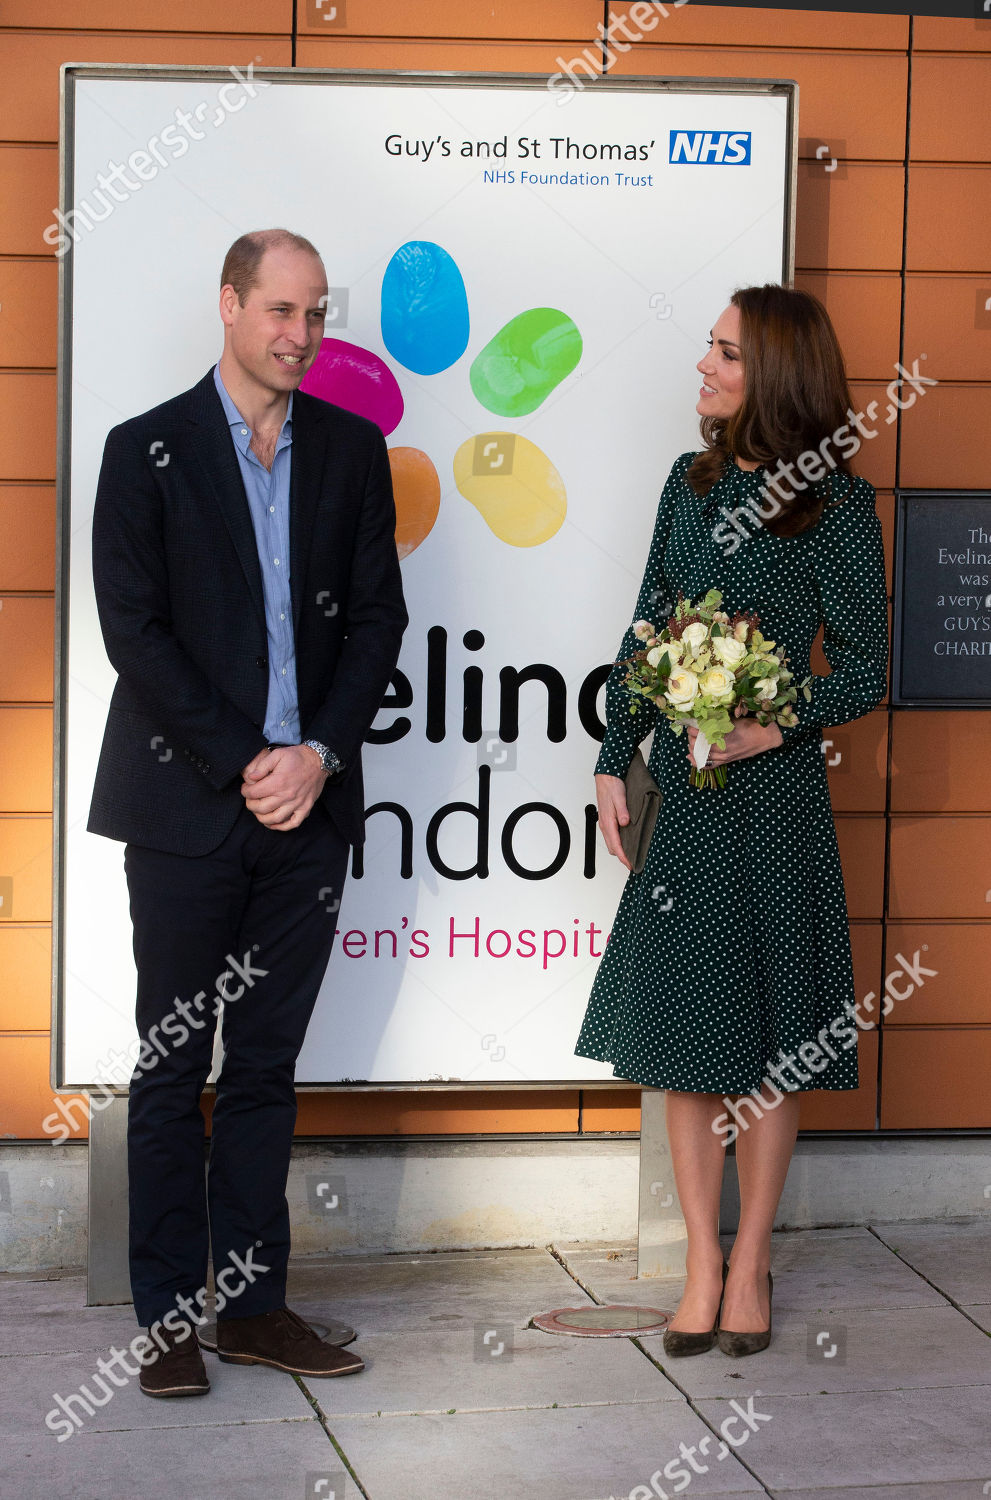 prince-william-and-catherine-duchess-of-cambridge-visit-to-evelina-childrens-hospital-london-uk-shutterstock-editorial-10025432n.jpg